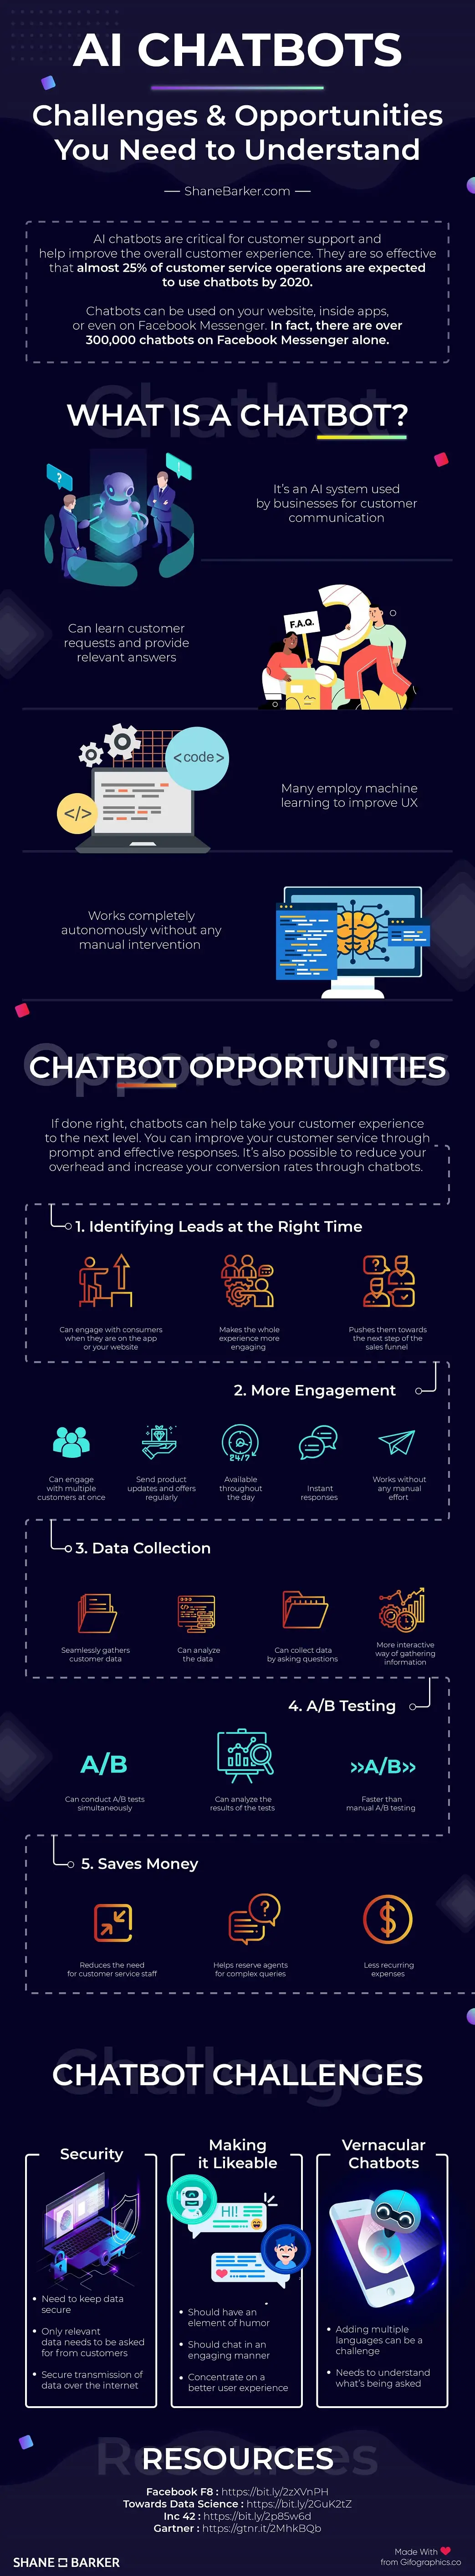 ai-chatbots-challenges-opportunities-you-need-to-understand.jpg